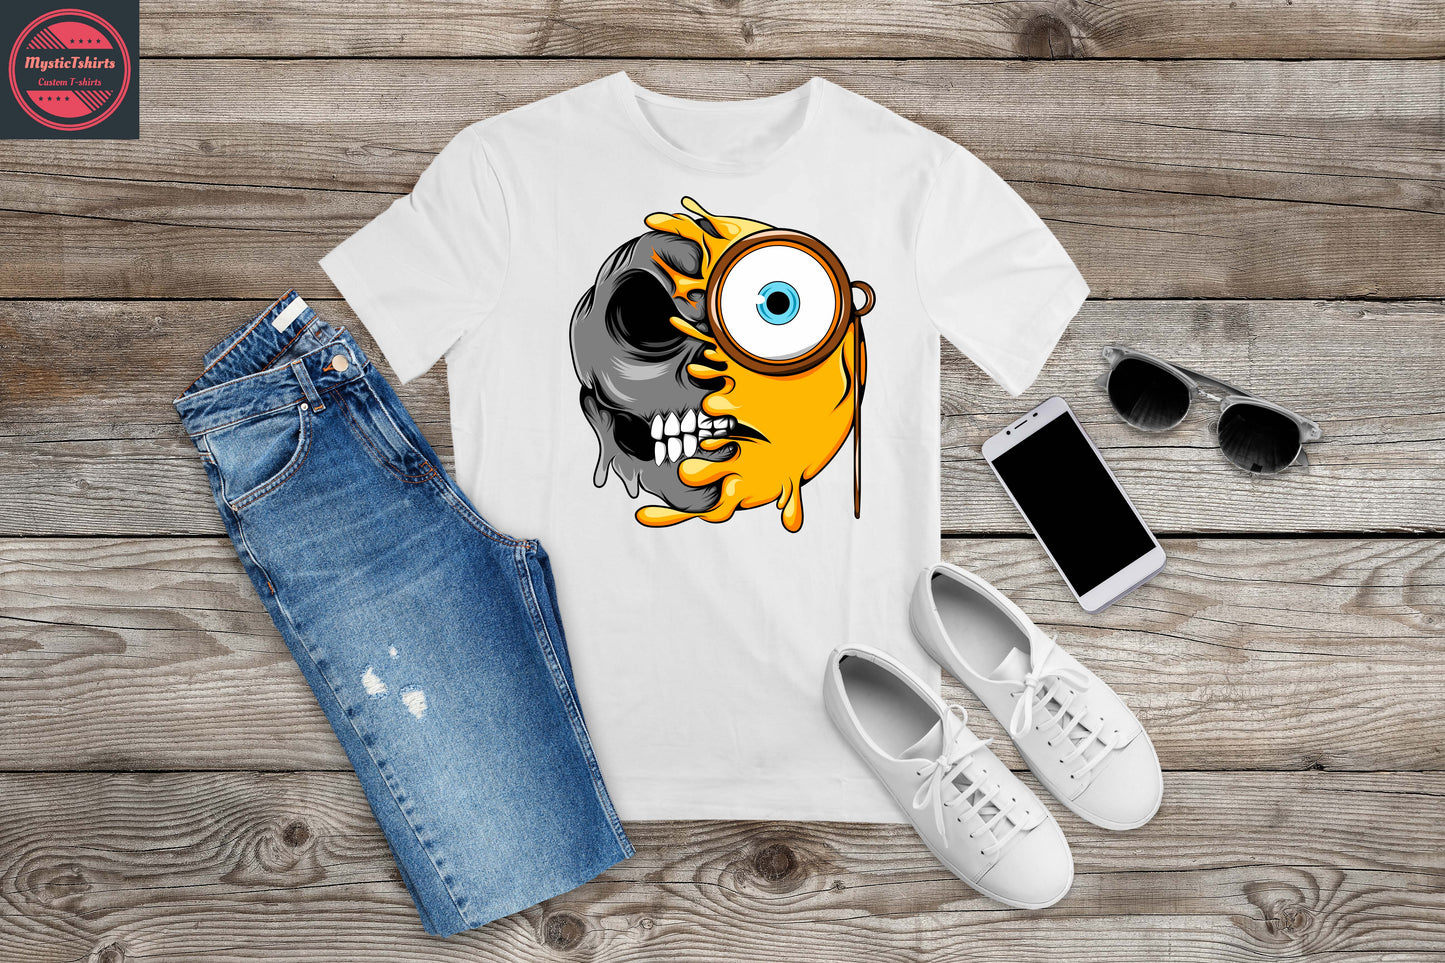 091. CRAZY FACE, Personalized T-Shirt, Custom Text, Make Your Own Shirt, Custom Tee